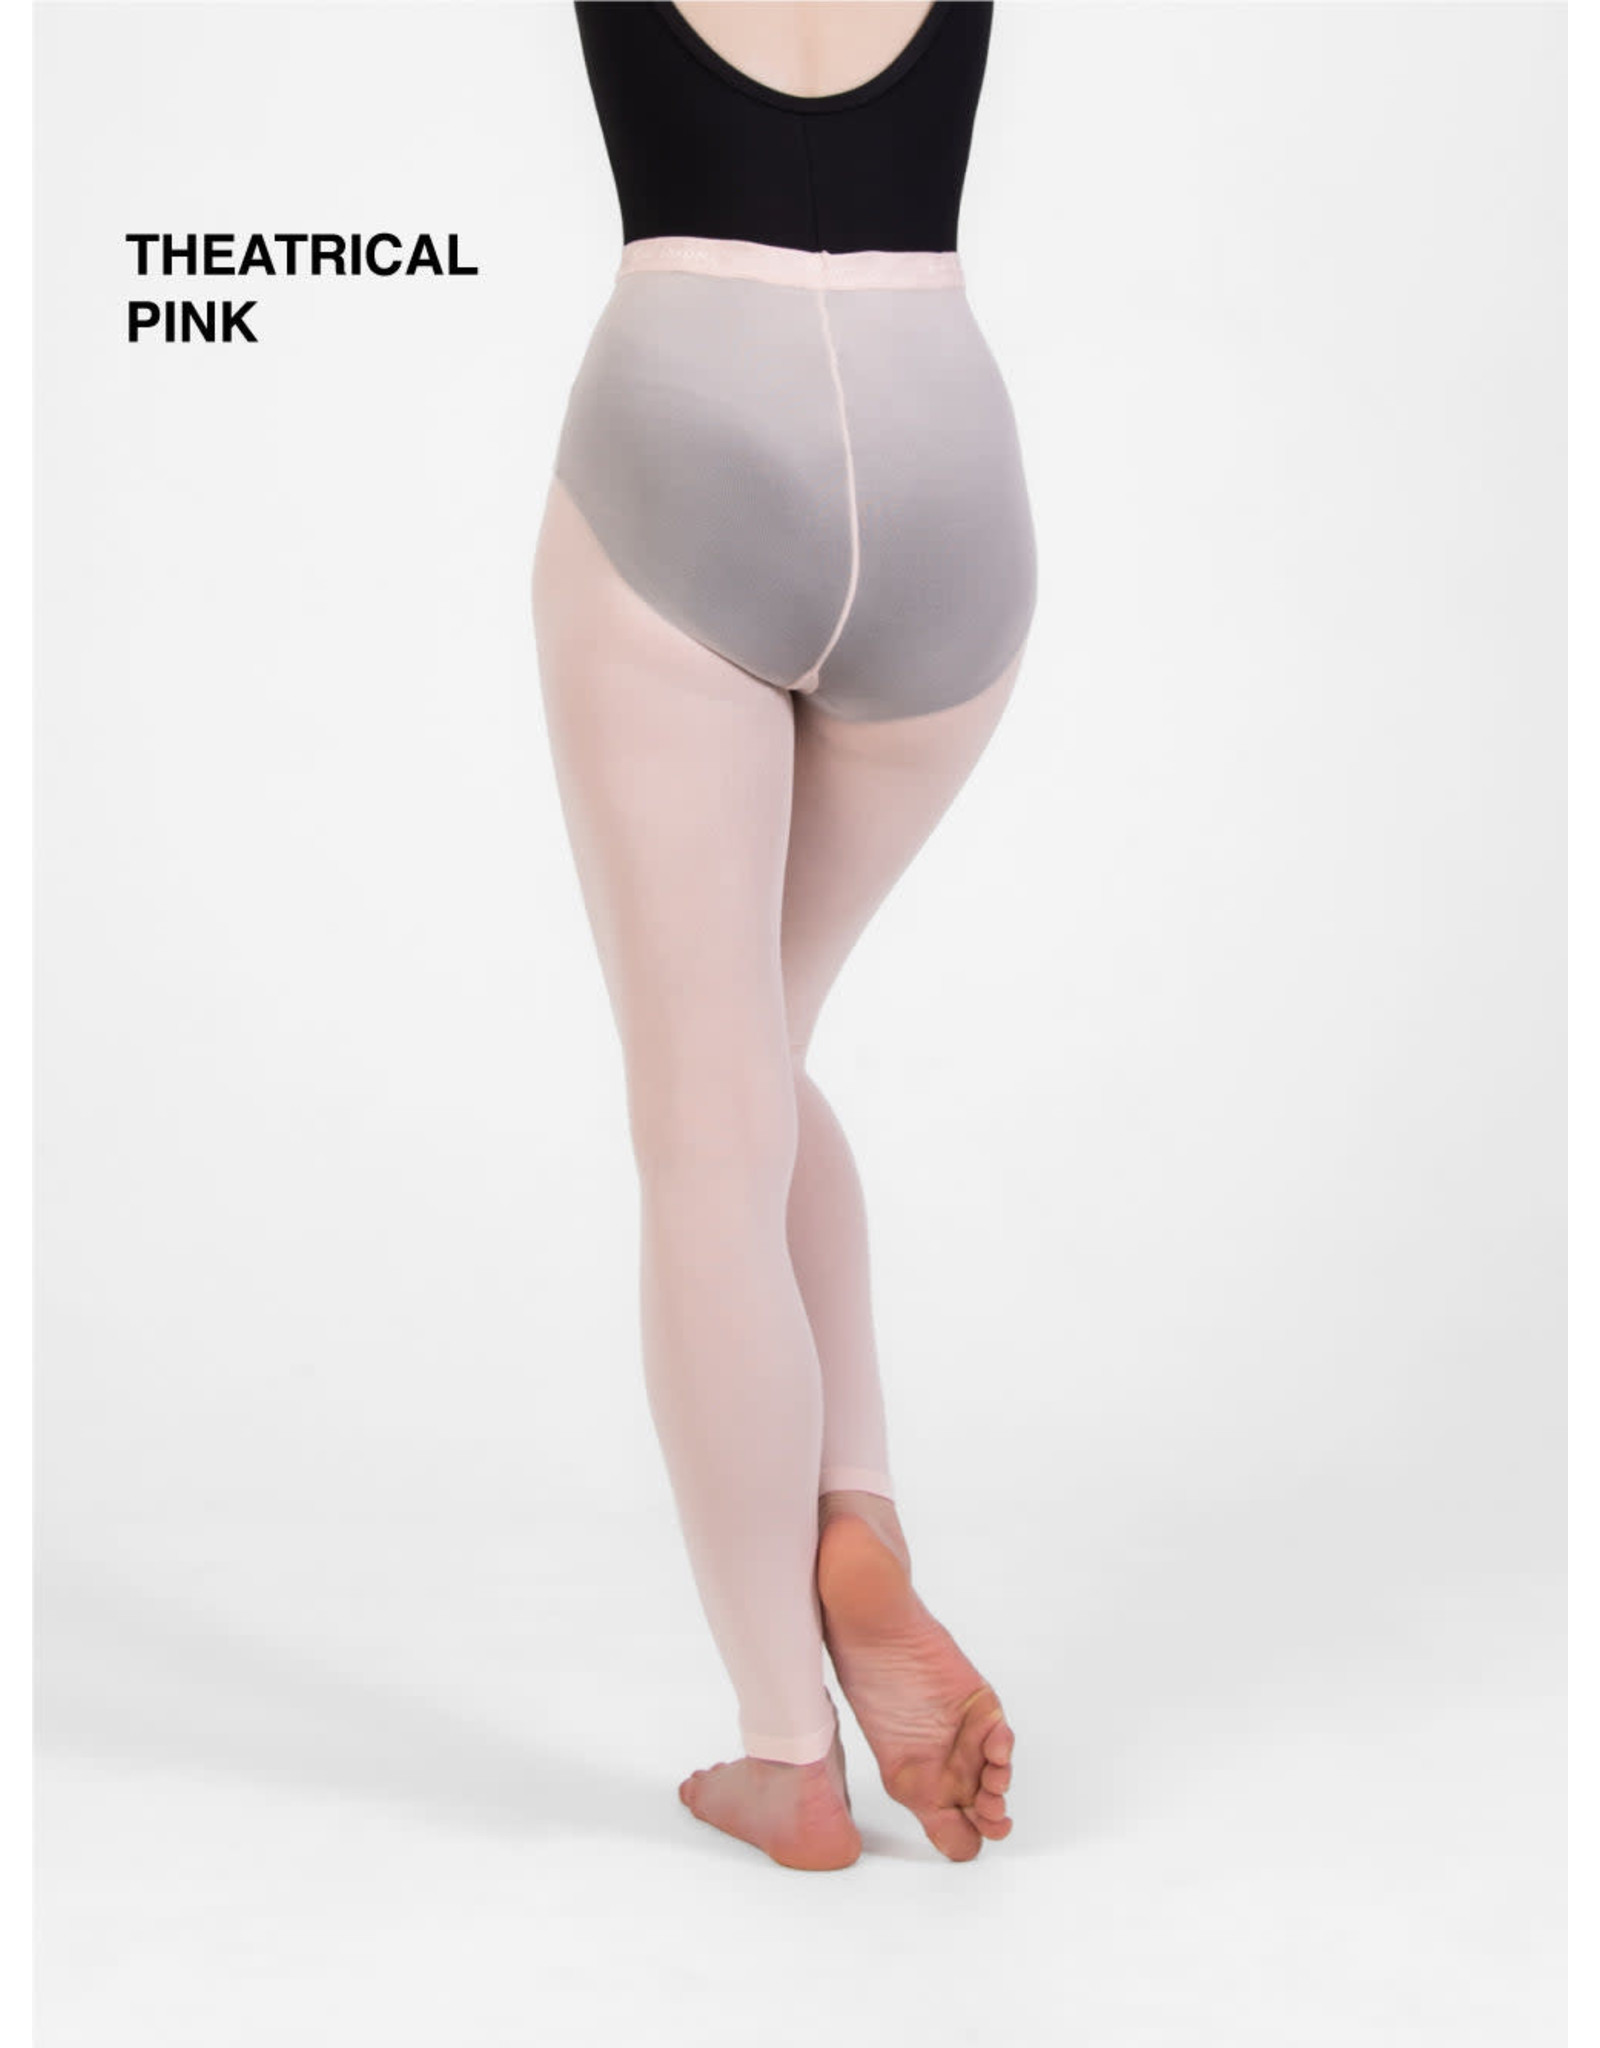 Body Wrappers Total STRETCH Footless Tights (A33X)